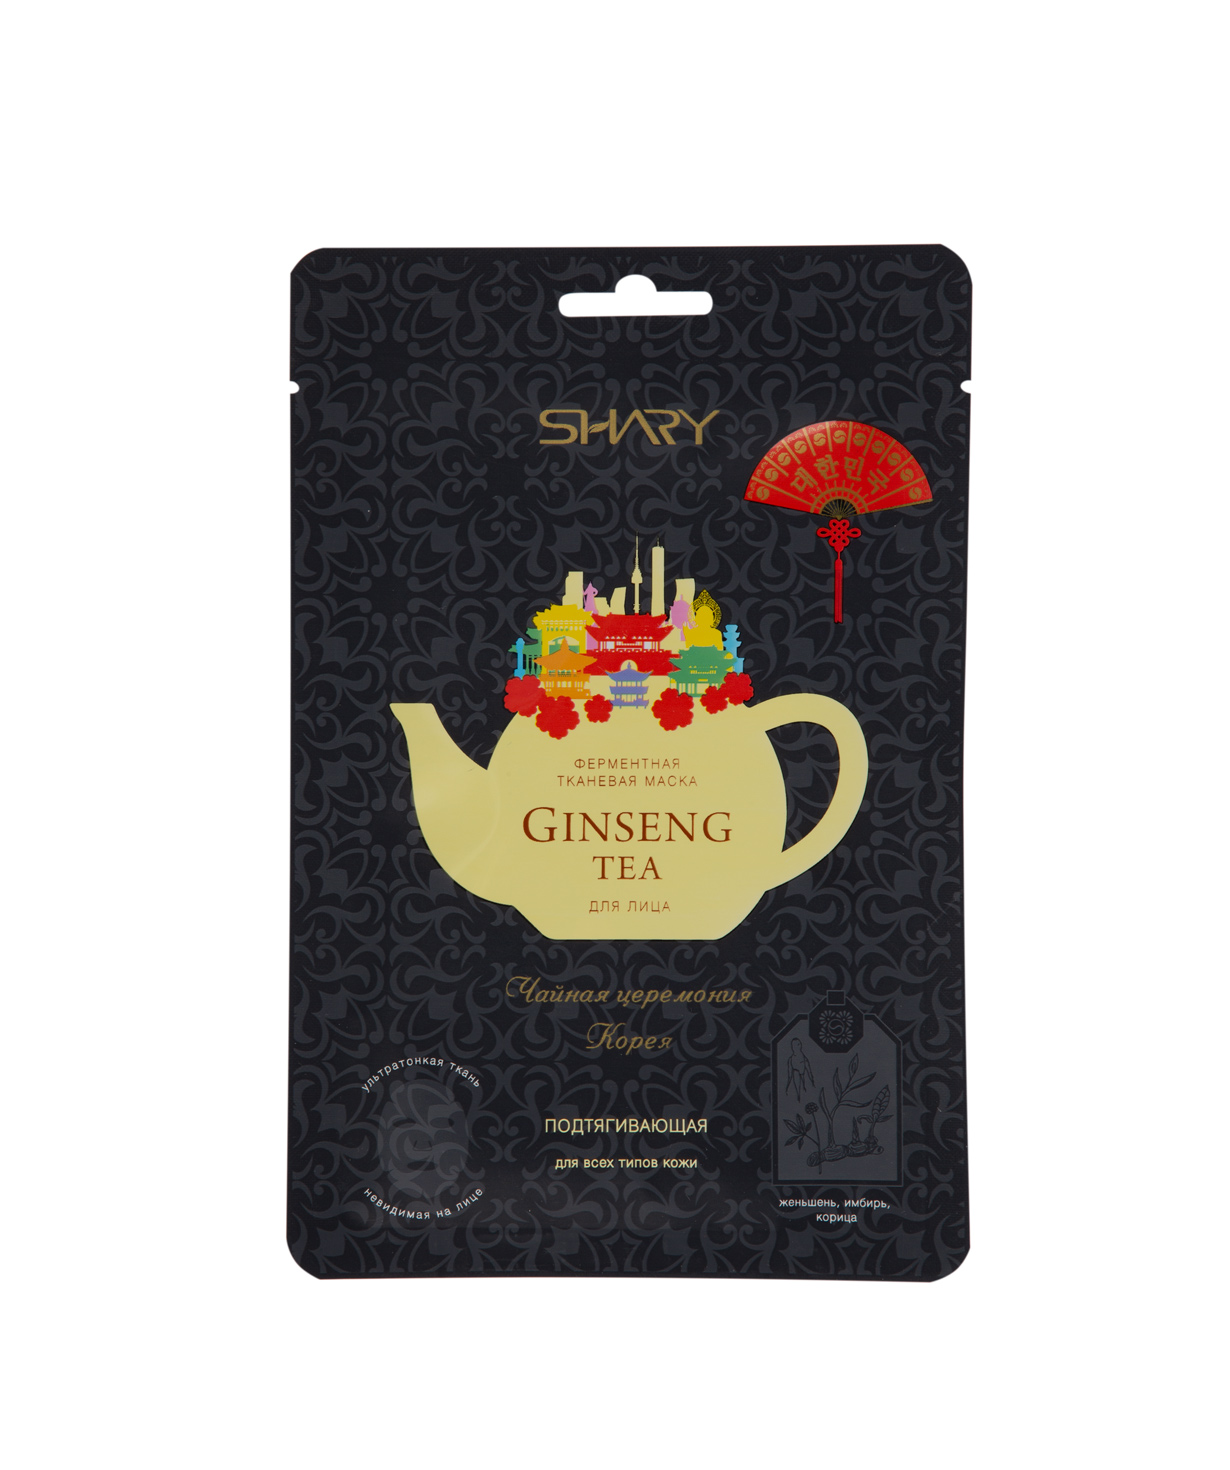 Collection `Shary` Tea ceremony